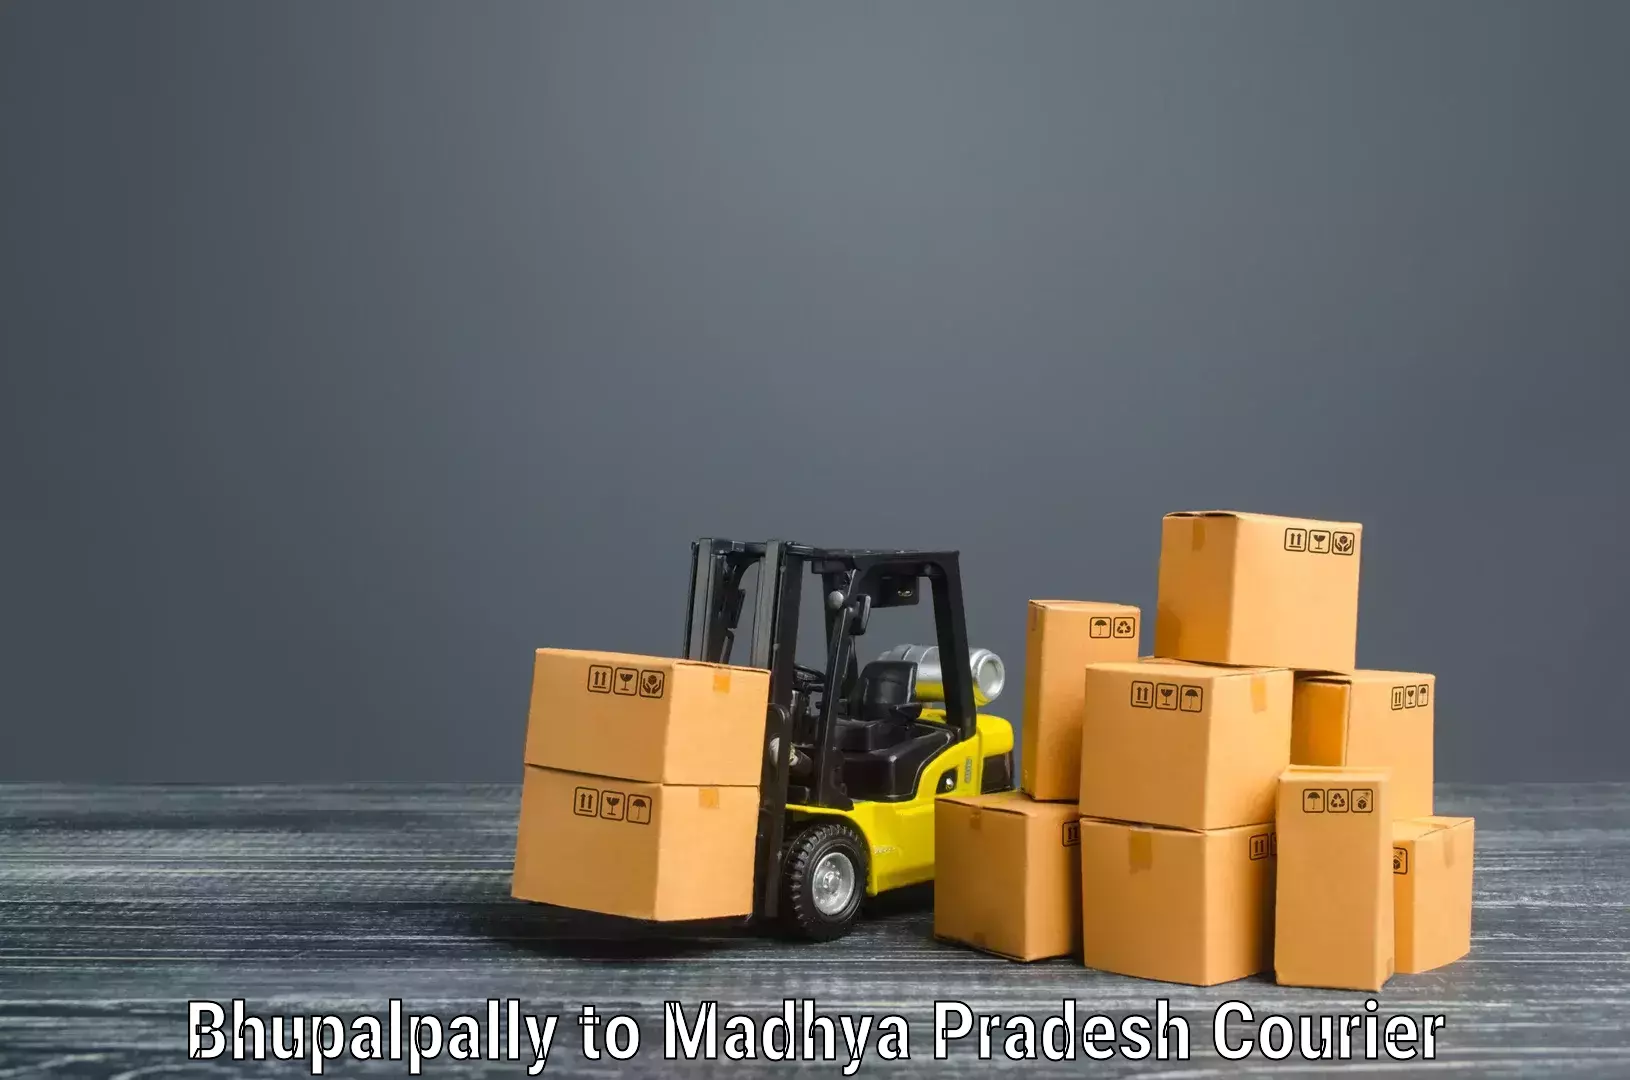 Cost-effective moving options Bhupalpally to Bhind